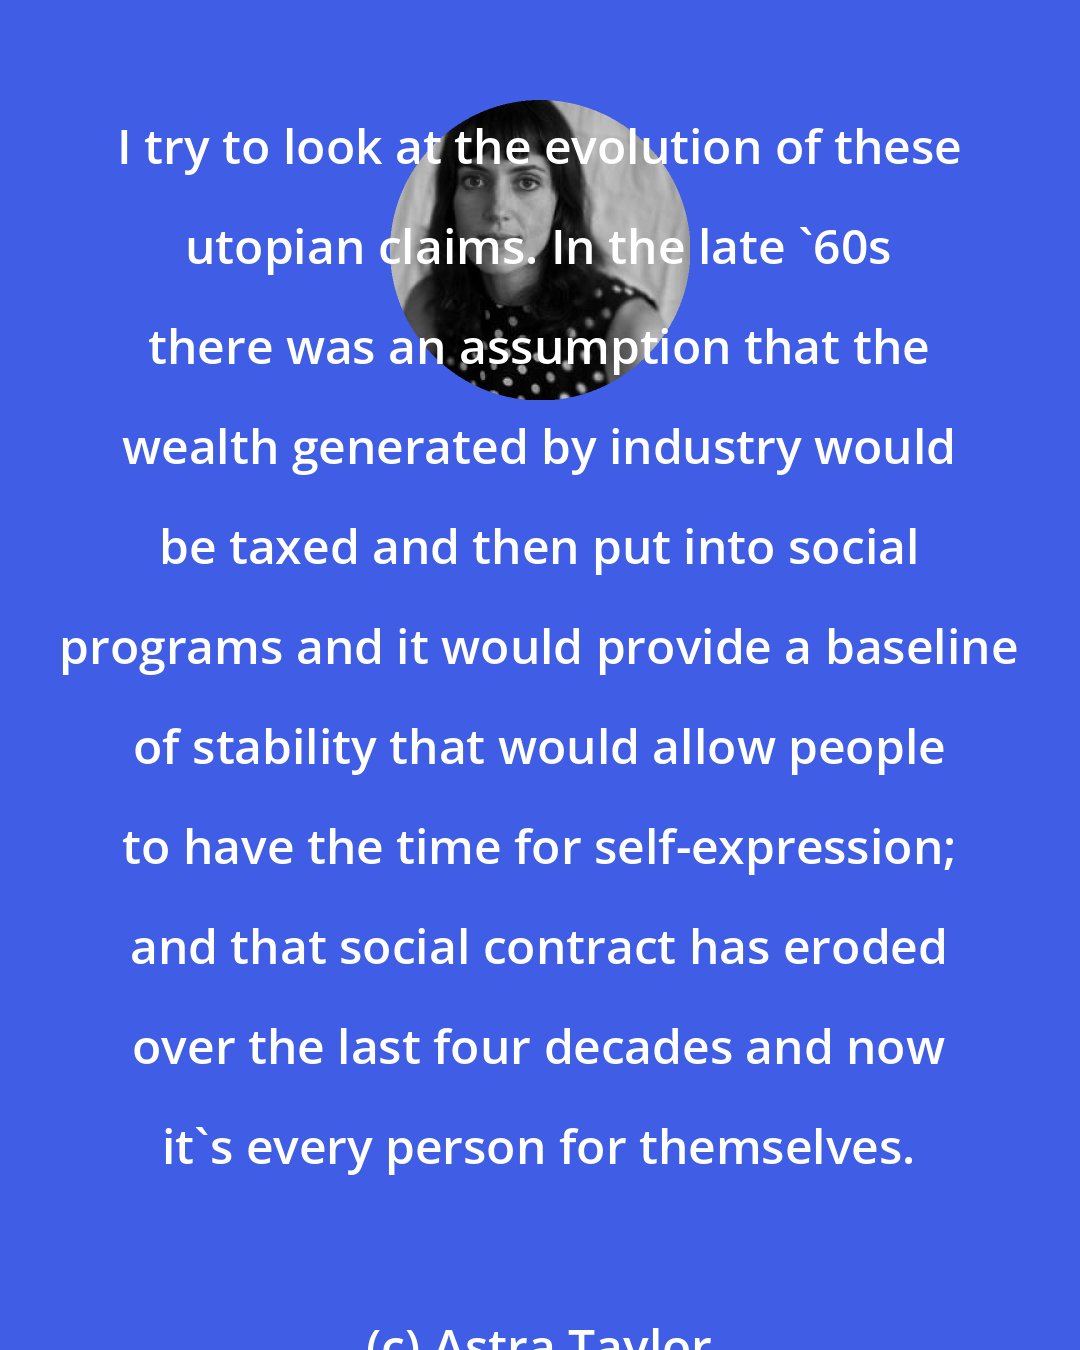 Astra Taylor: I try to look at the evolution of these utopian claims. In the late '60s there was an assumption that the wealth generated by industry would be taxed and then put into social programs and it would provide a baseline of stability that would allow people to have the time for self-expression; and that social contract has eroded over the last four decades and now it's every person for themselves.